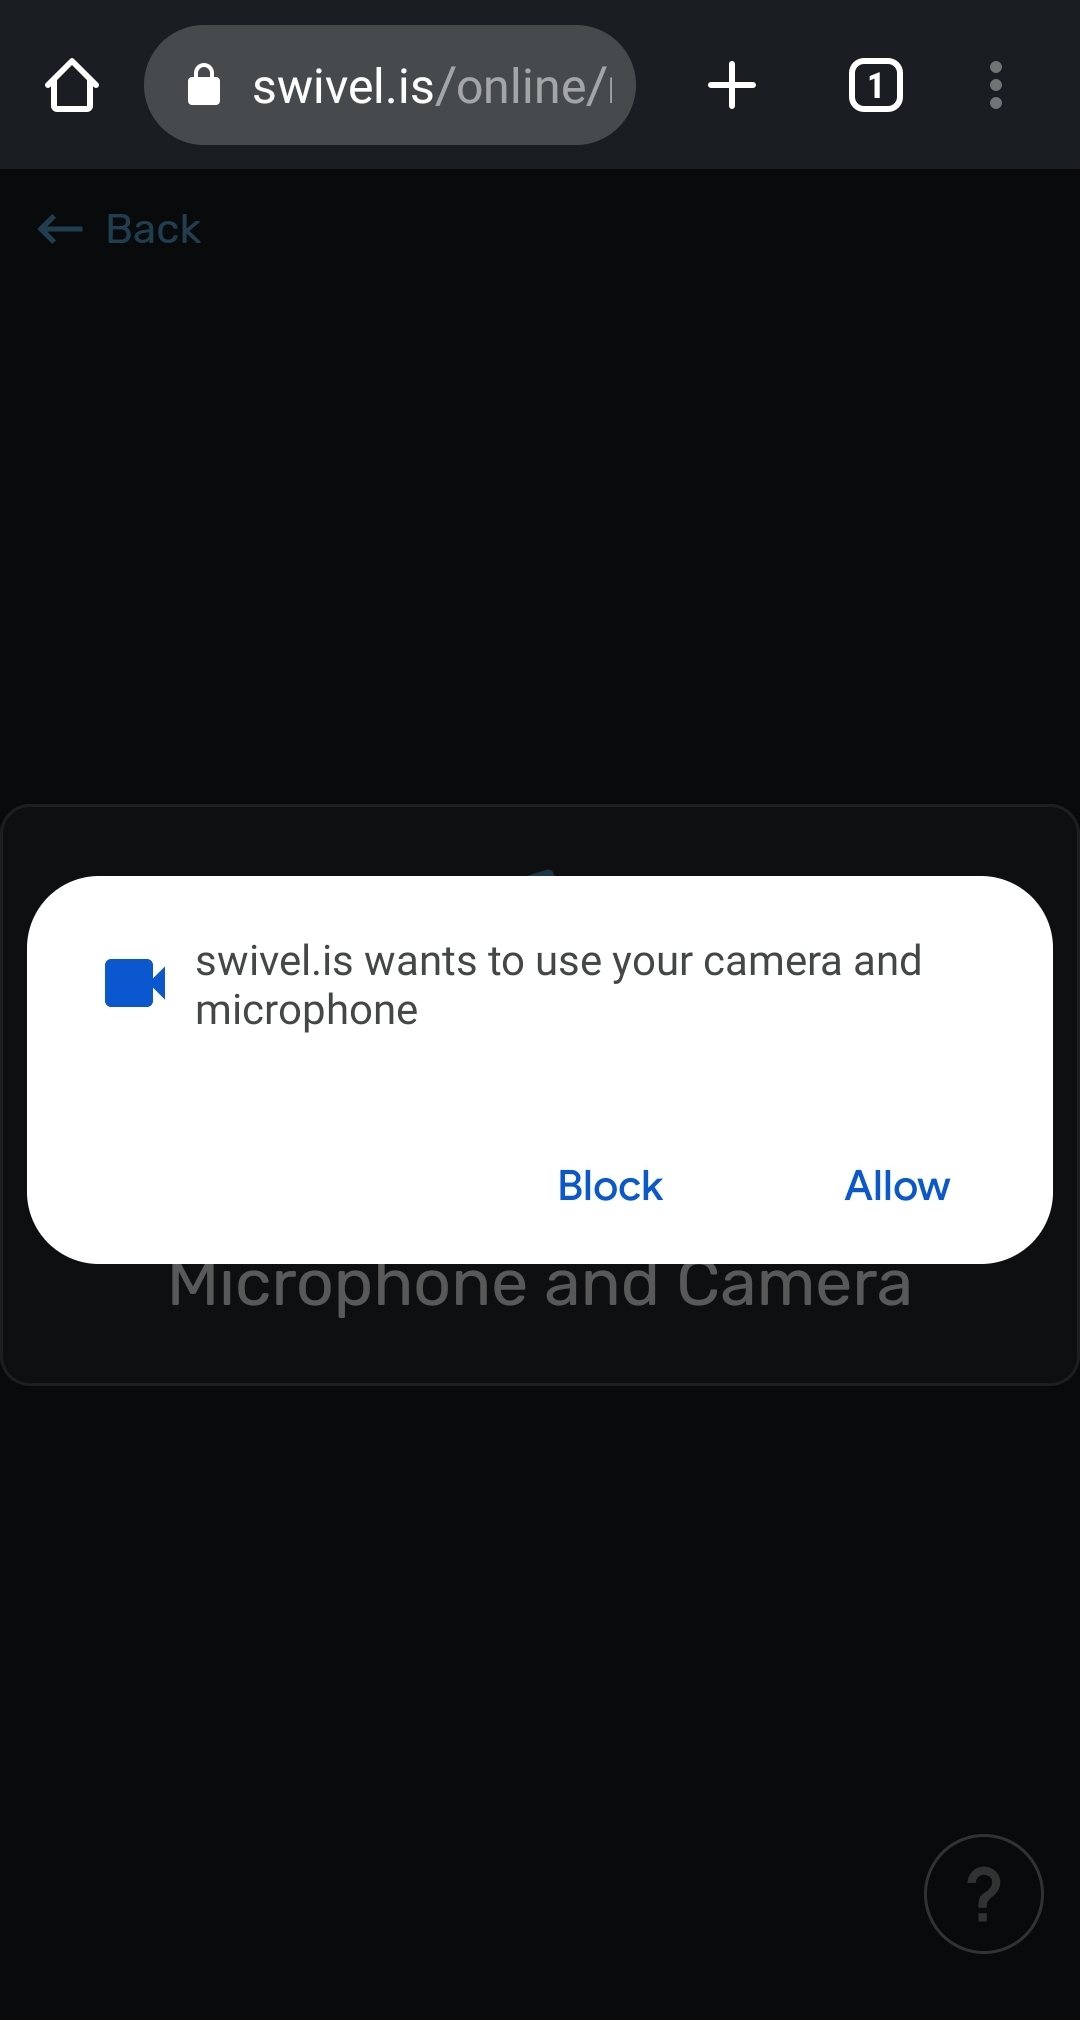 12__swivel.is_wants_to_use_your_camera_and_microphone.jpg